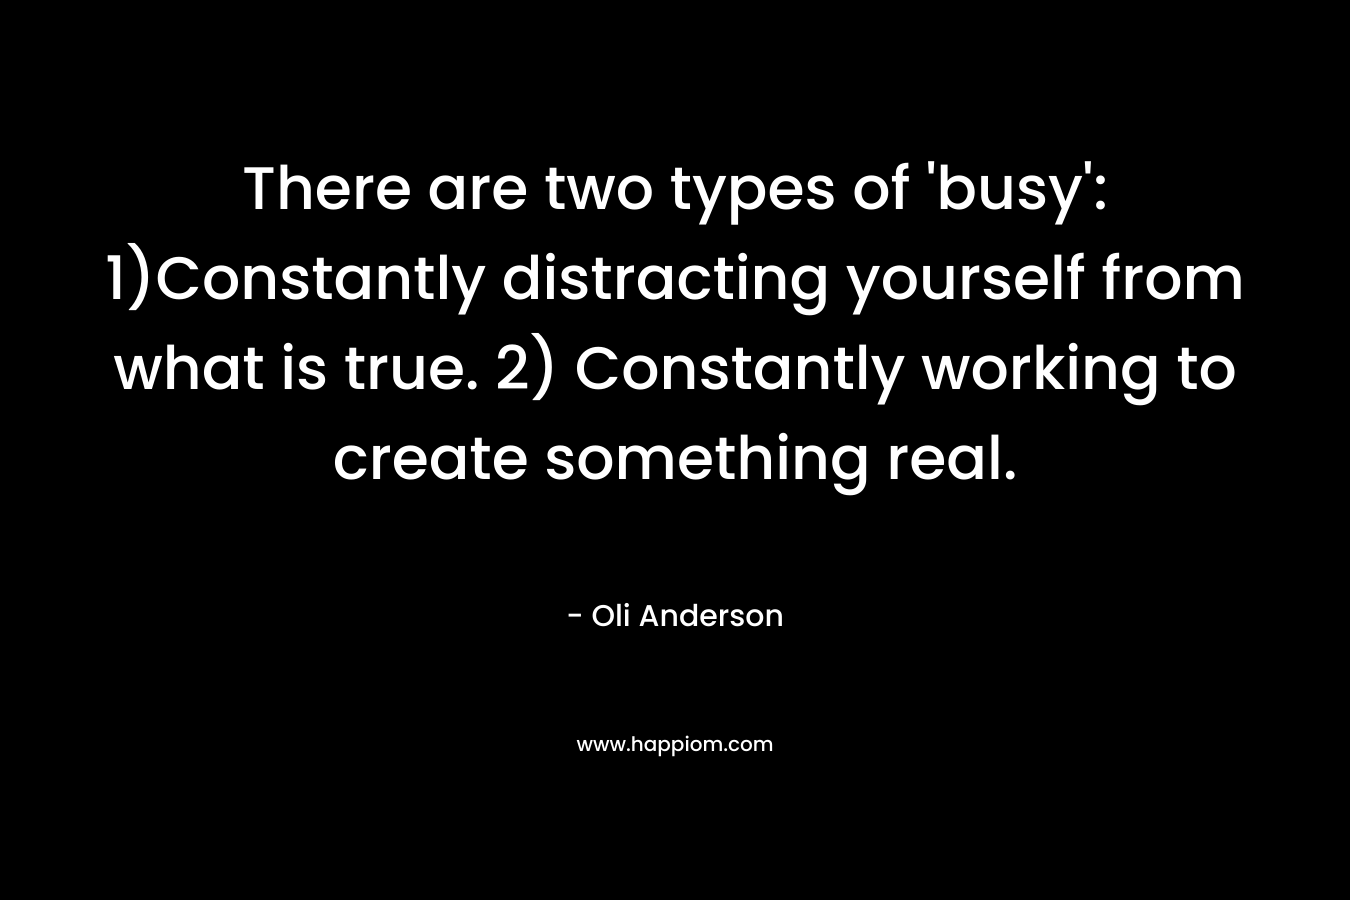 There are two types of ‘busy’: 1)Constantly distracting yourself from what is true. 2) Constantly working to create something real. – Oli Anderson